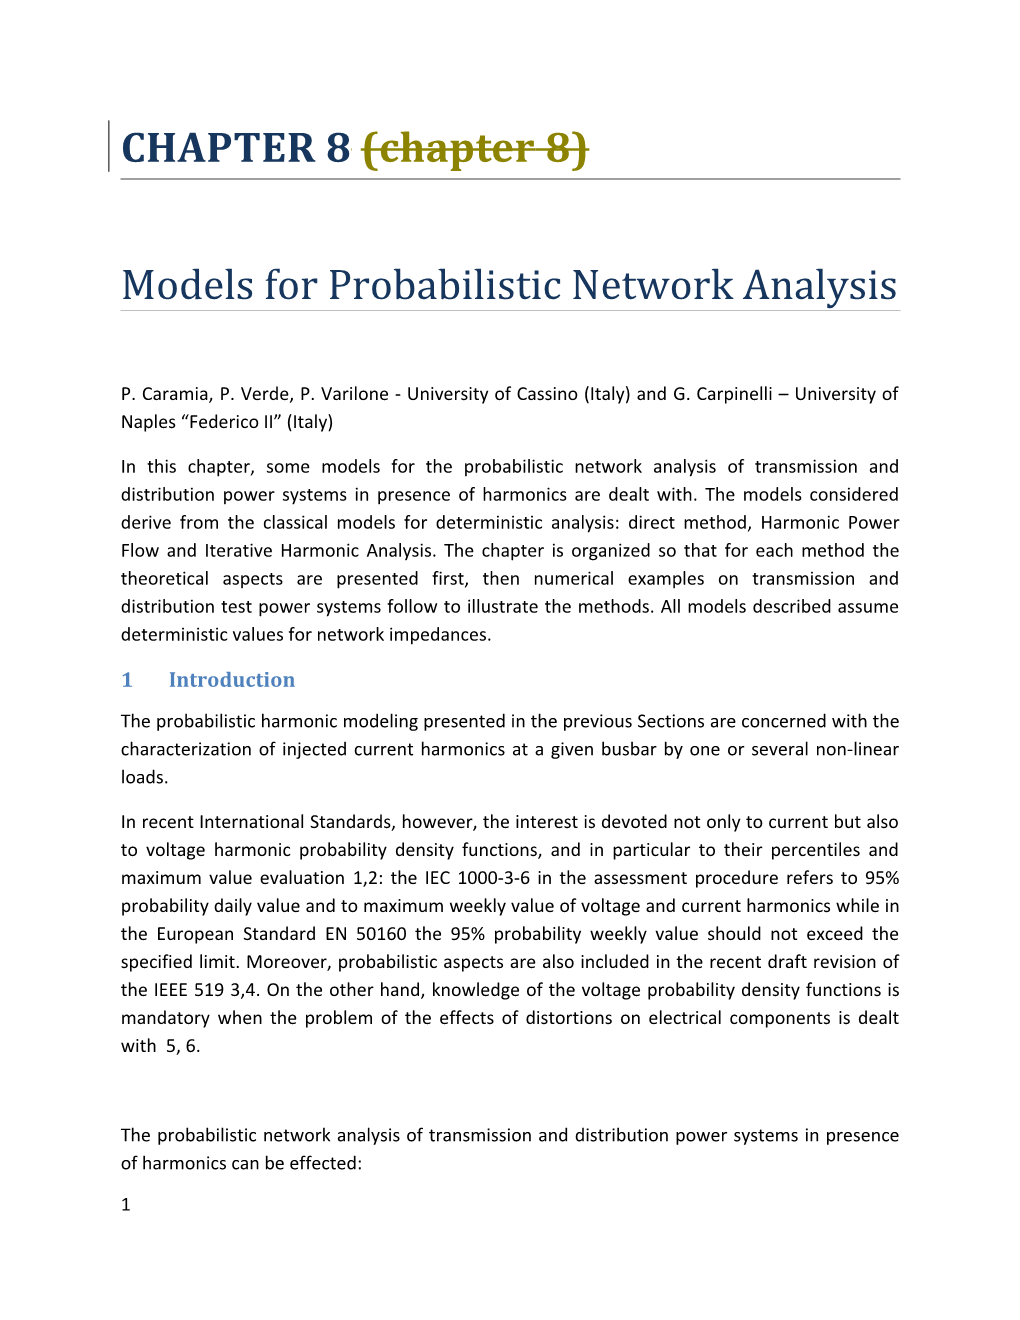 Models for Probabilistic Network Analysis s1